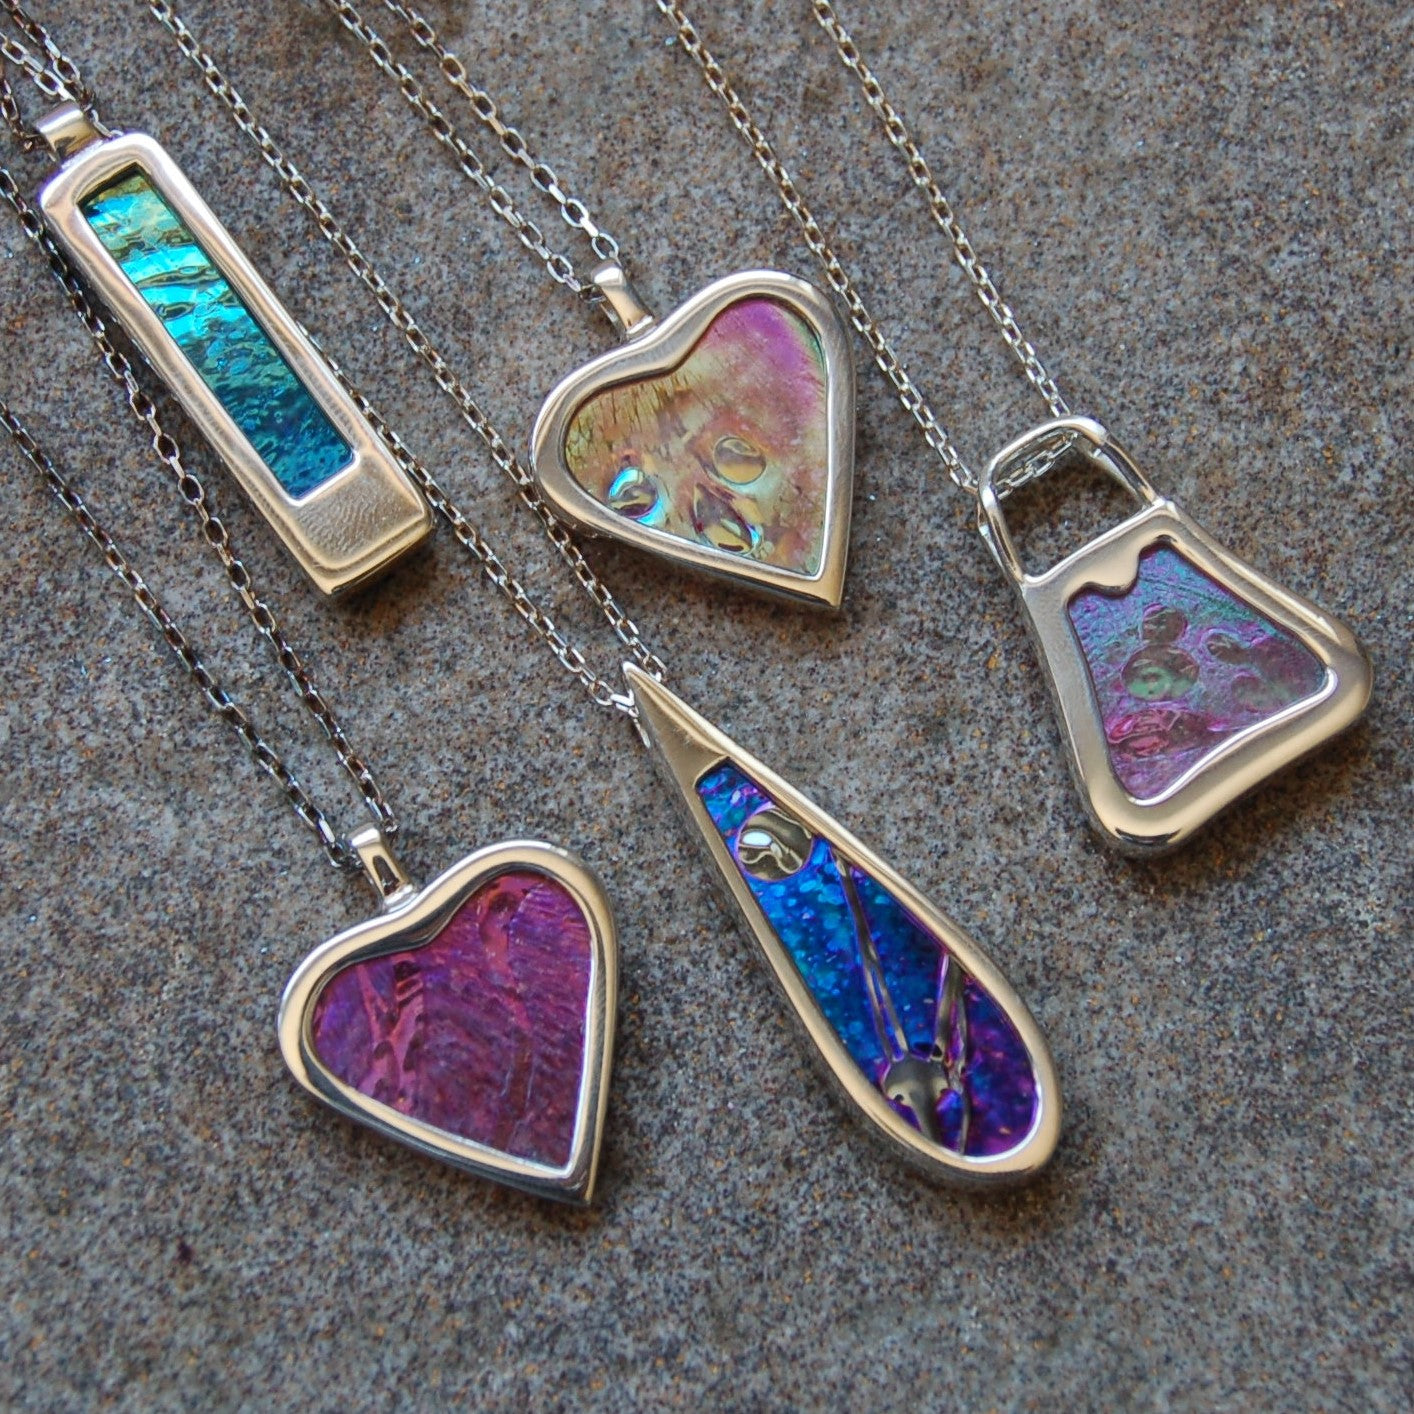 Hallmarked sterling silver pendants with memorial glassand ashes @ £180 each.